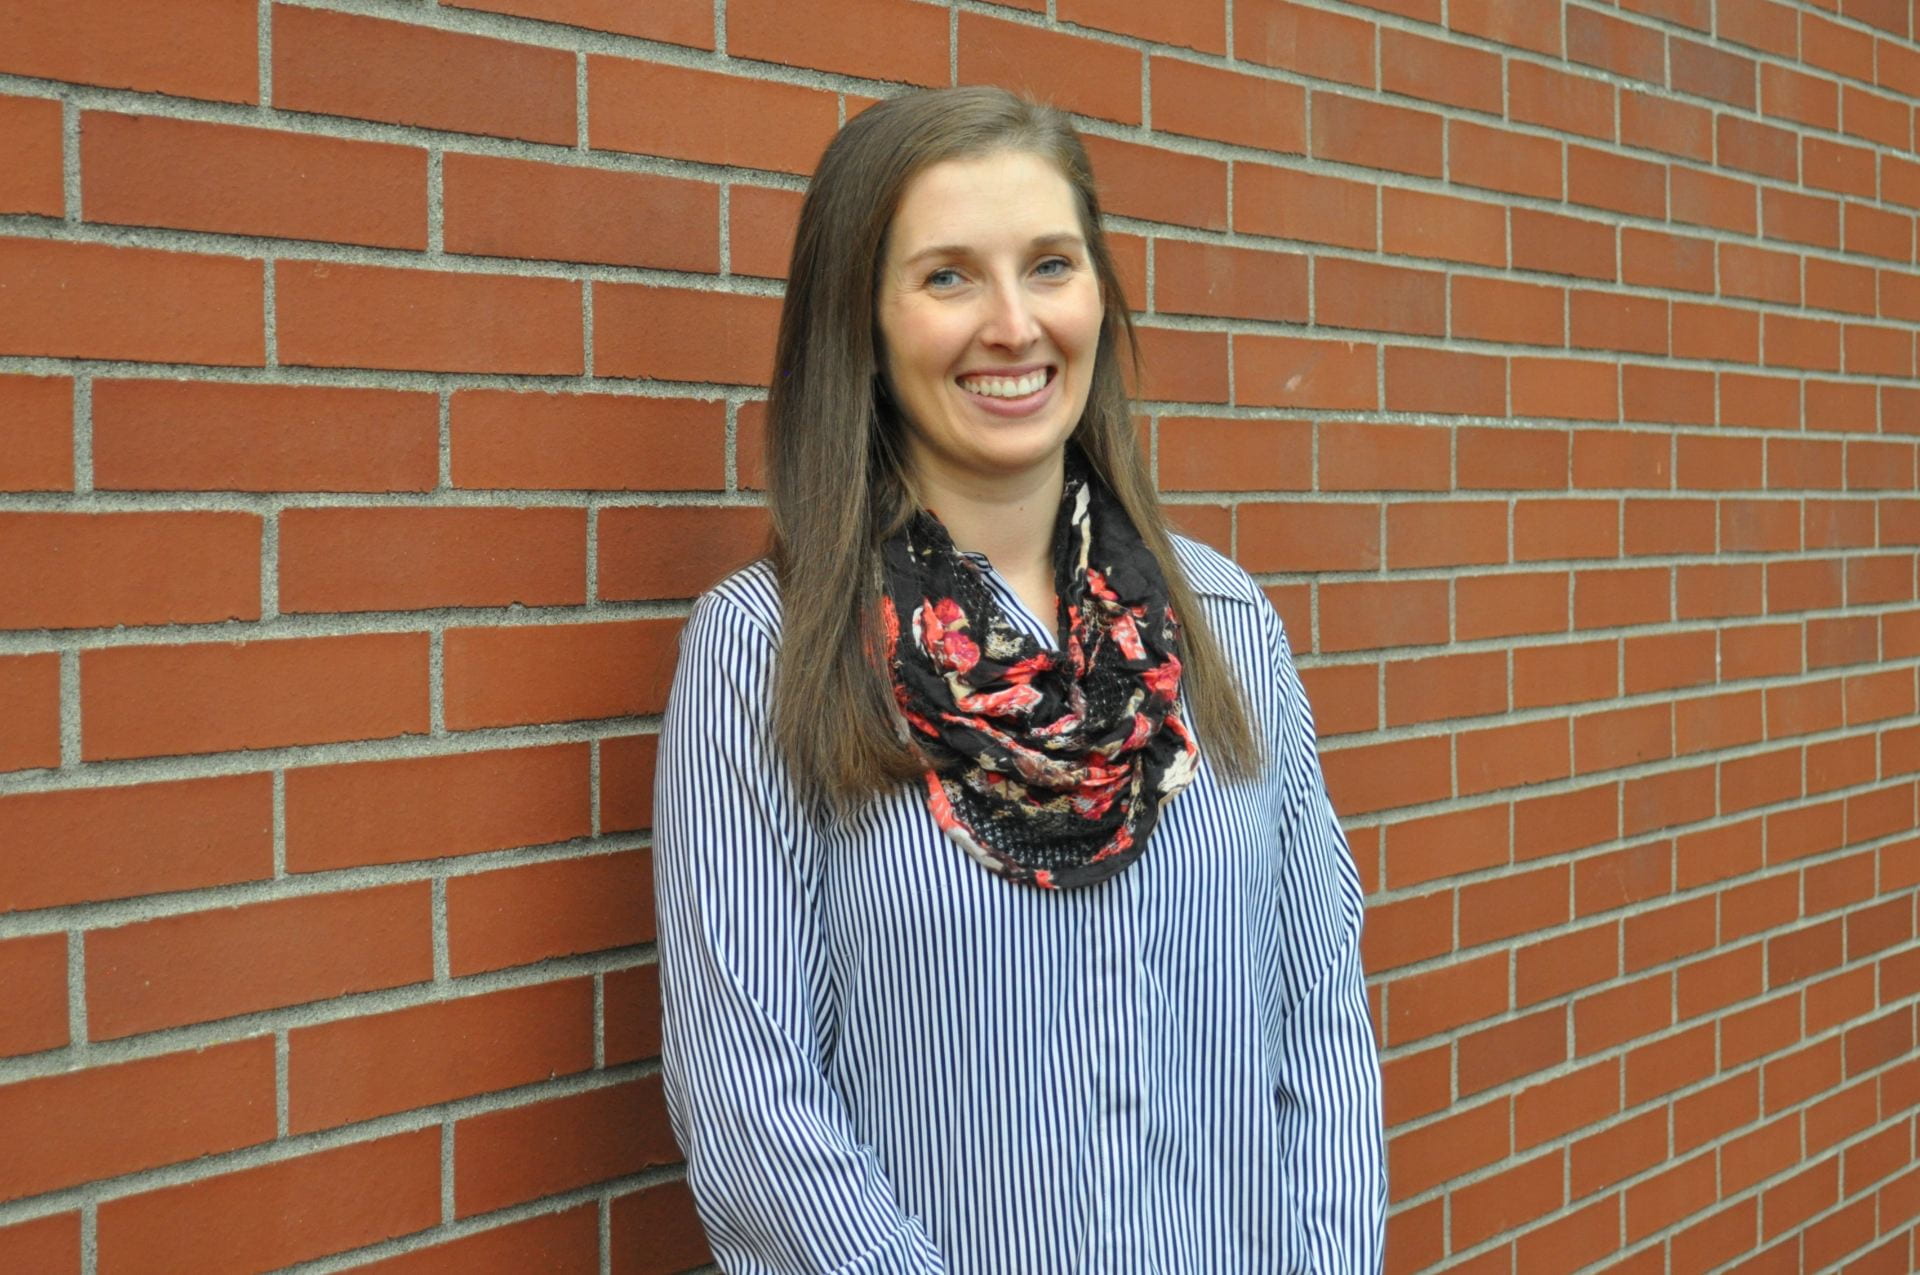 Anna in a grey long sleeve shirt with a patterned scarf standing in front of a brick wall